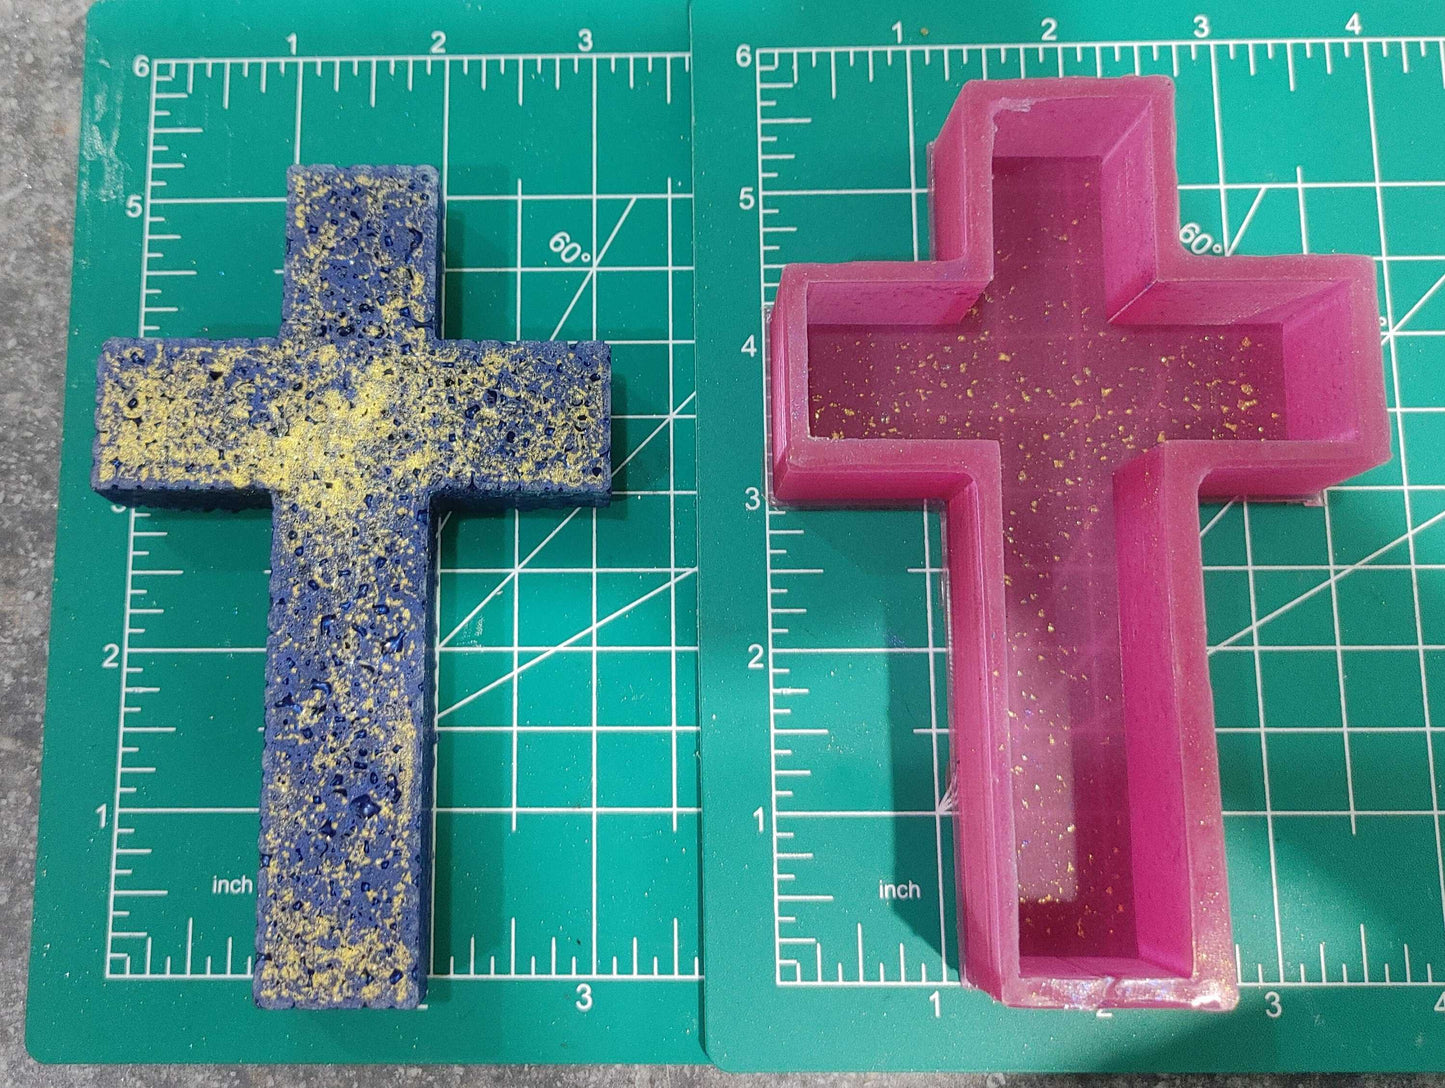 Plain Cross Silicone Resin Mold or Freshie Mold